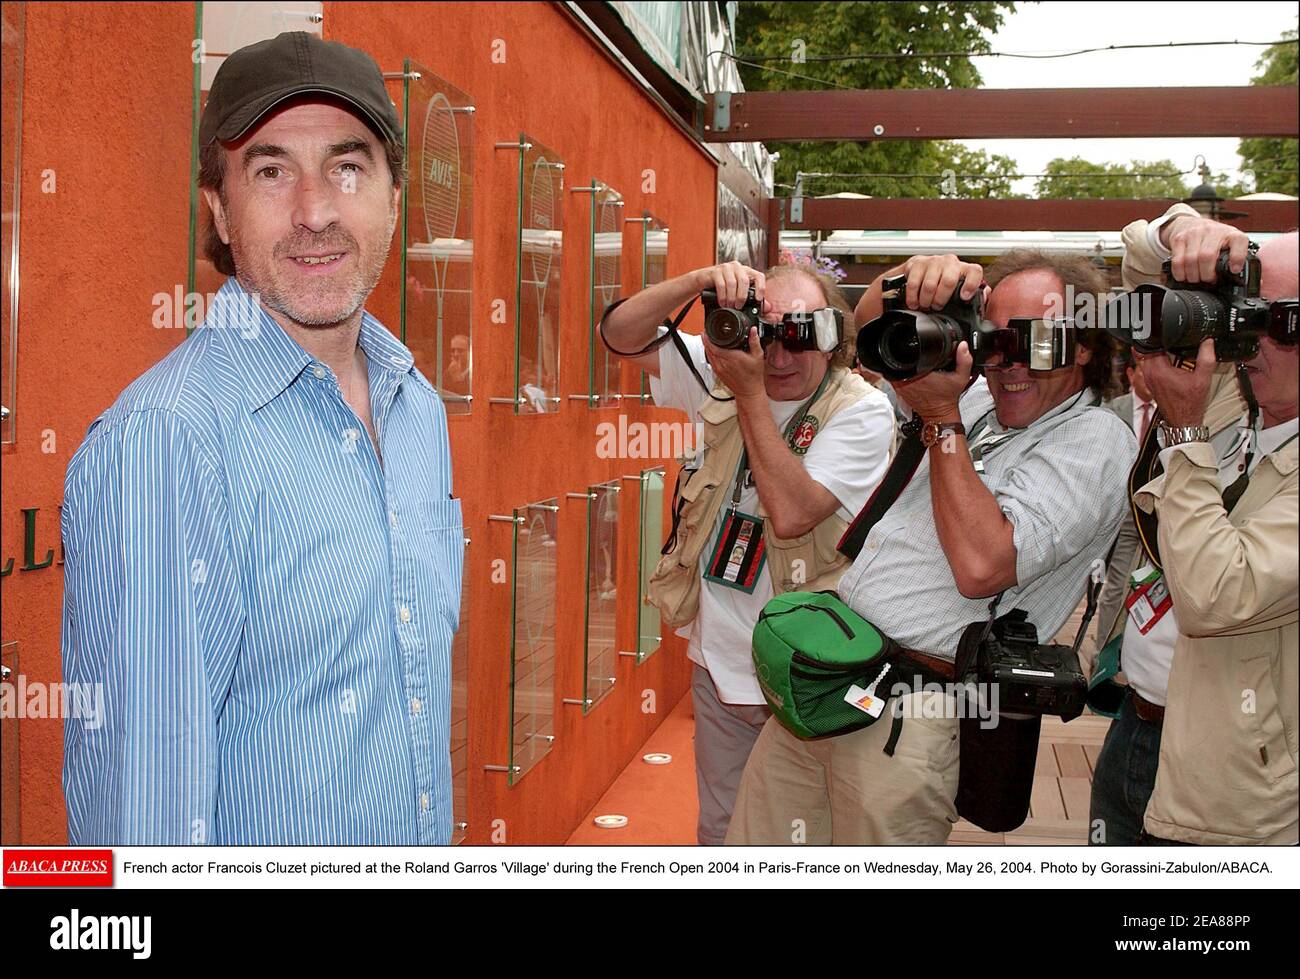 French actor Francois Cluzet pictured at the Roland Garros 'Village' during the French Open 2004 in Paris-France on Wednesday, May 26, 2004. Photo by Gorassini-Zabulon/ABACA. Stock Photo